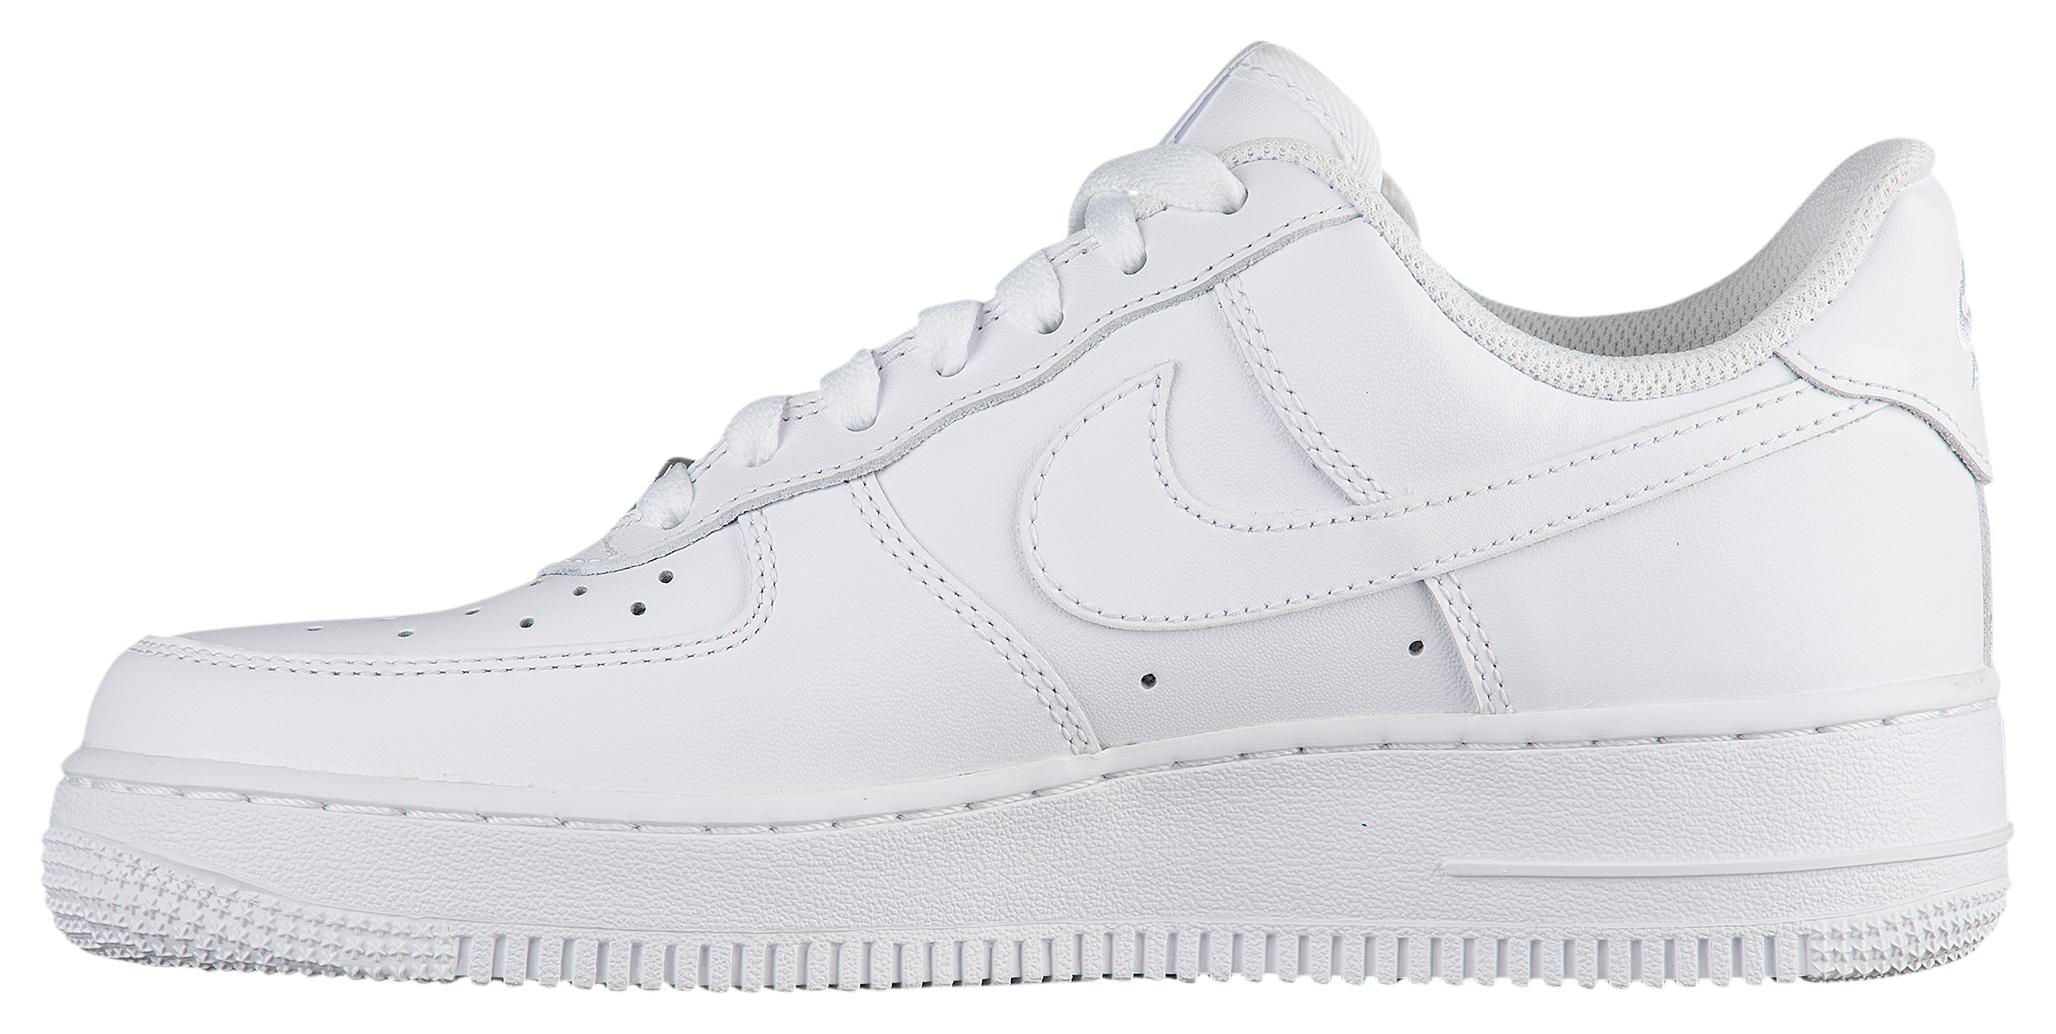 Nike Leather Air Force 1 07 Le Low - Shoes in White/White (White 